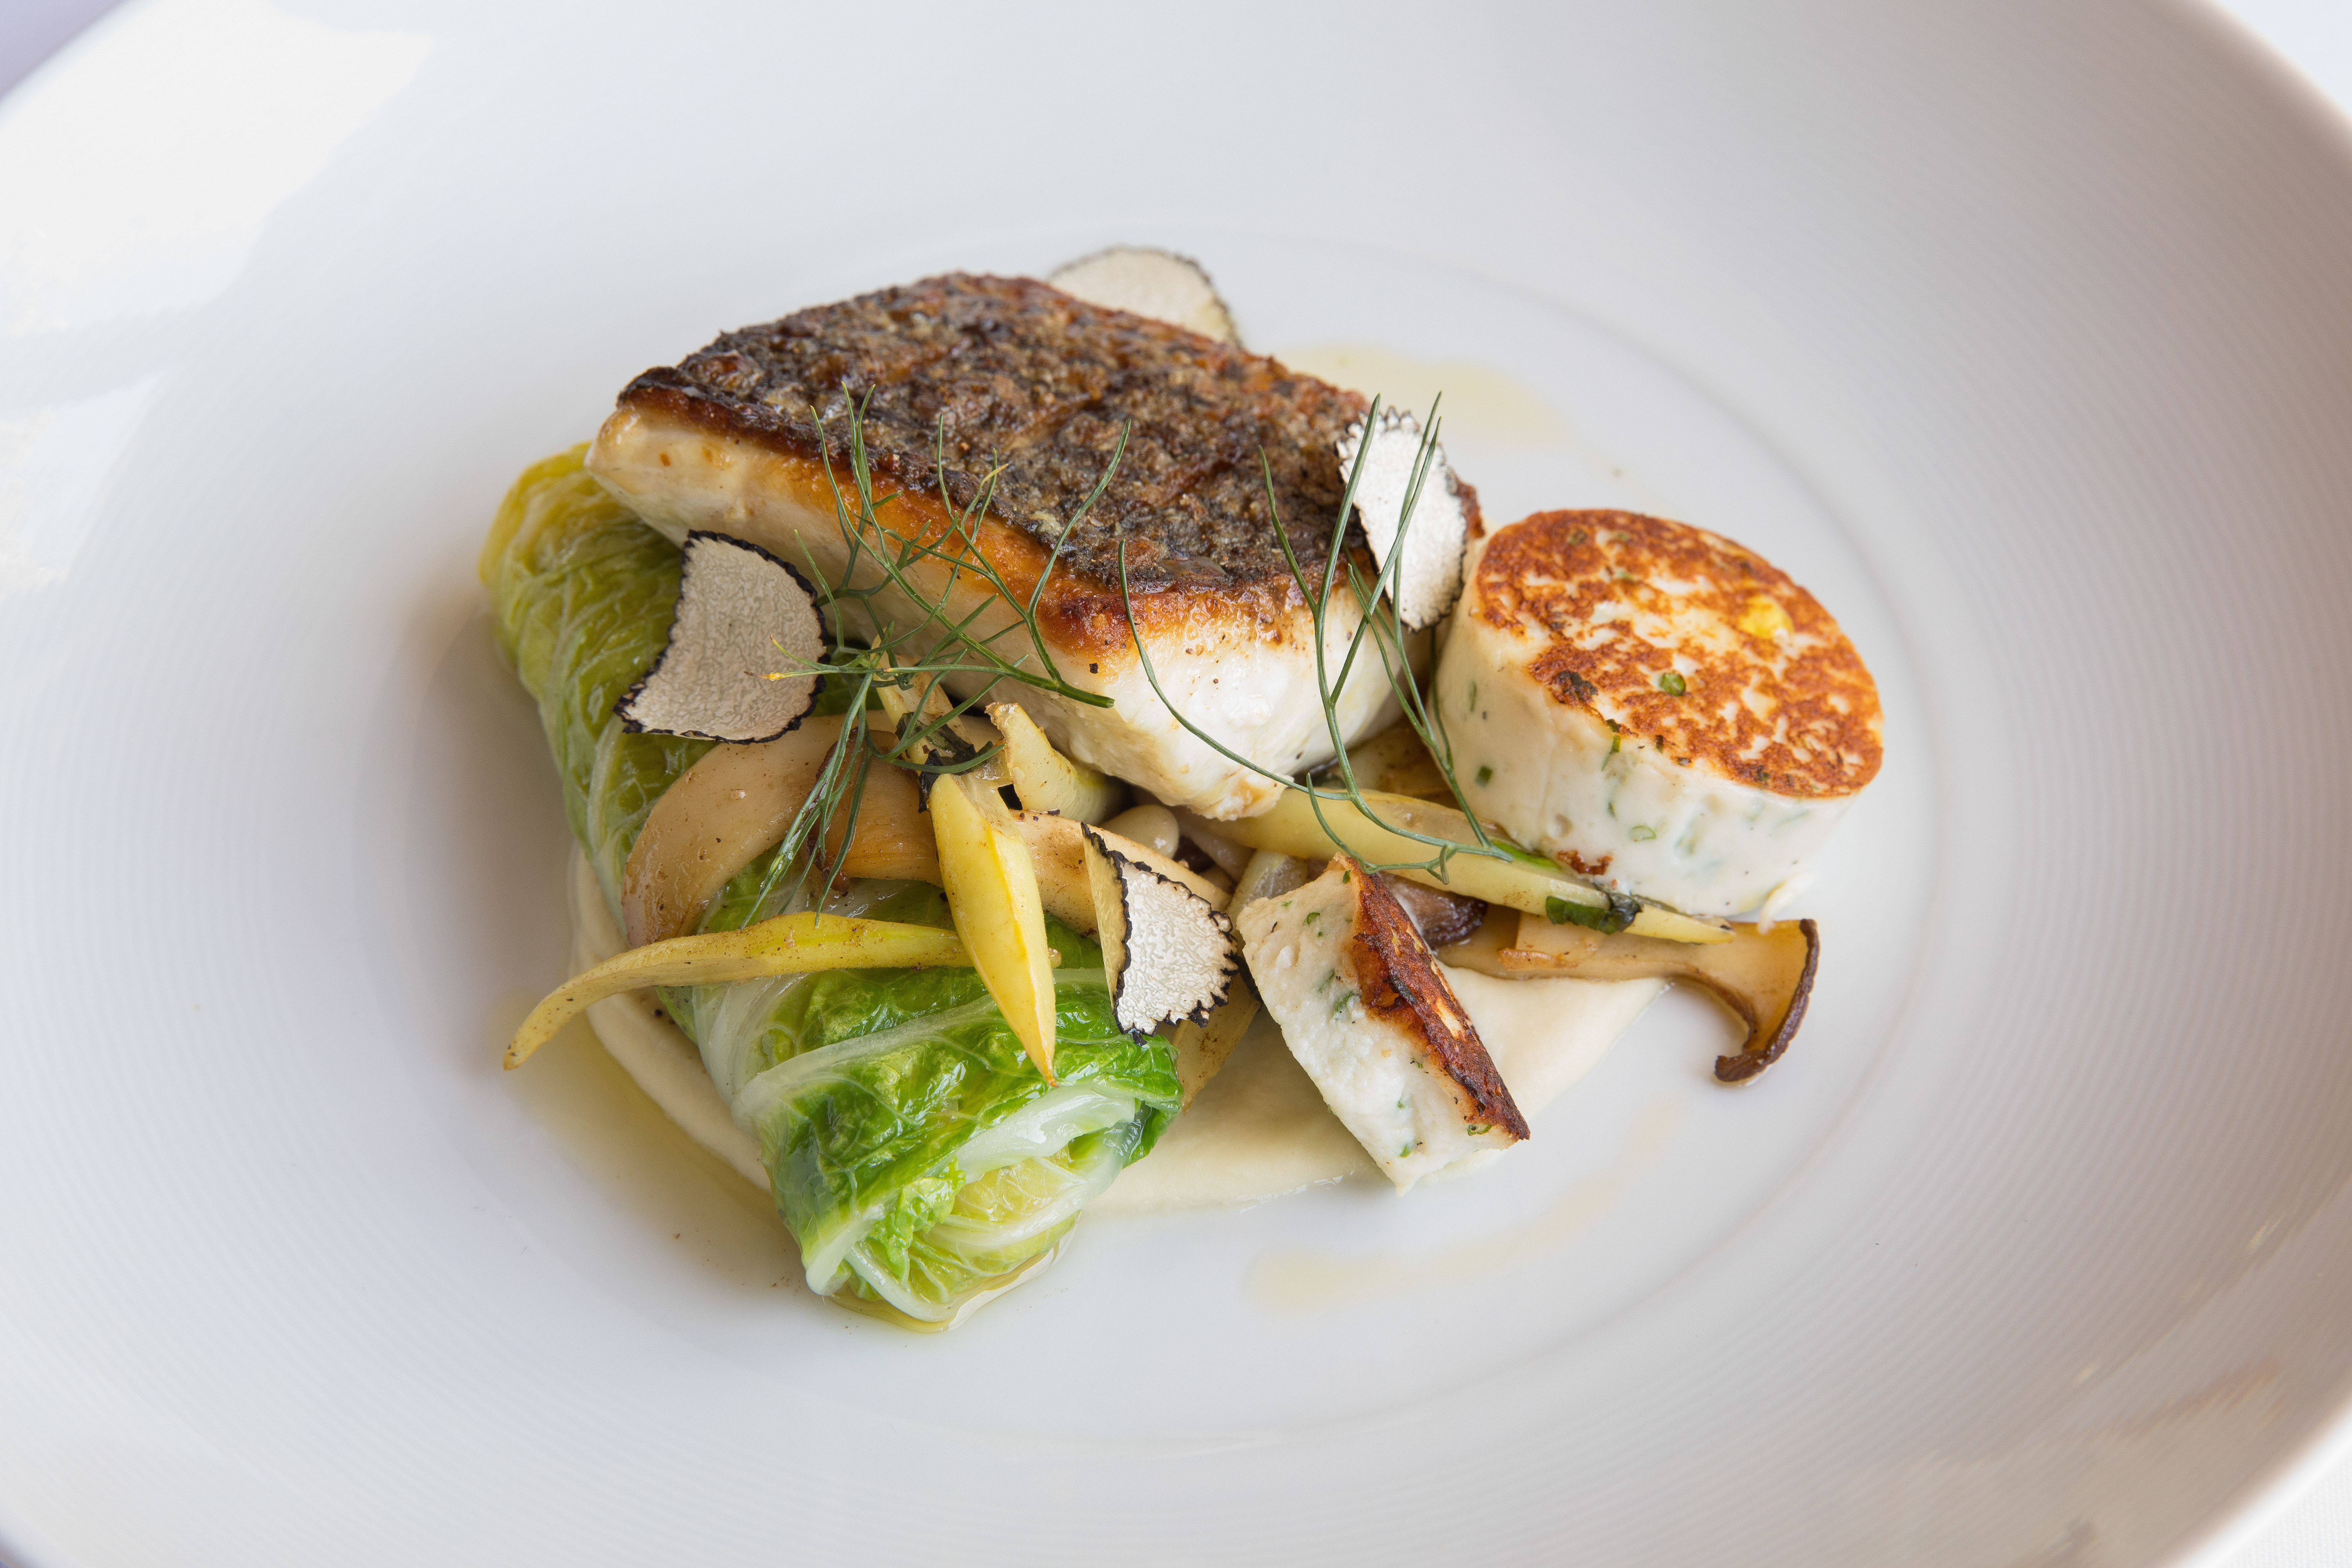 Striped bass with beans, cabbage, and truffle at Mooncusser Fish House